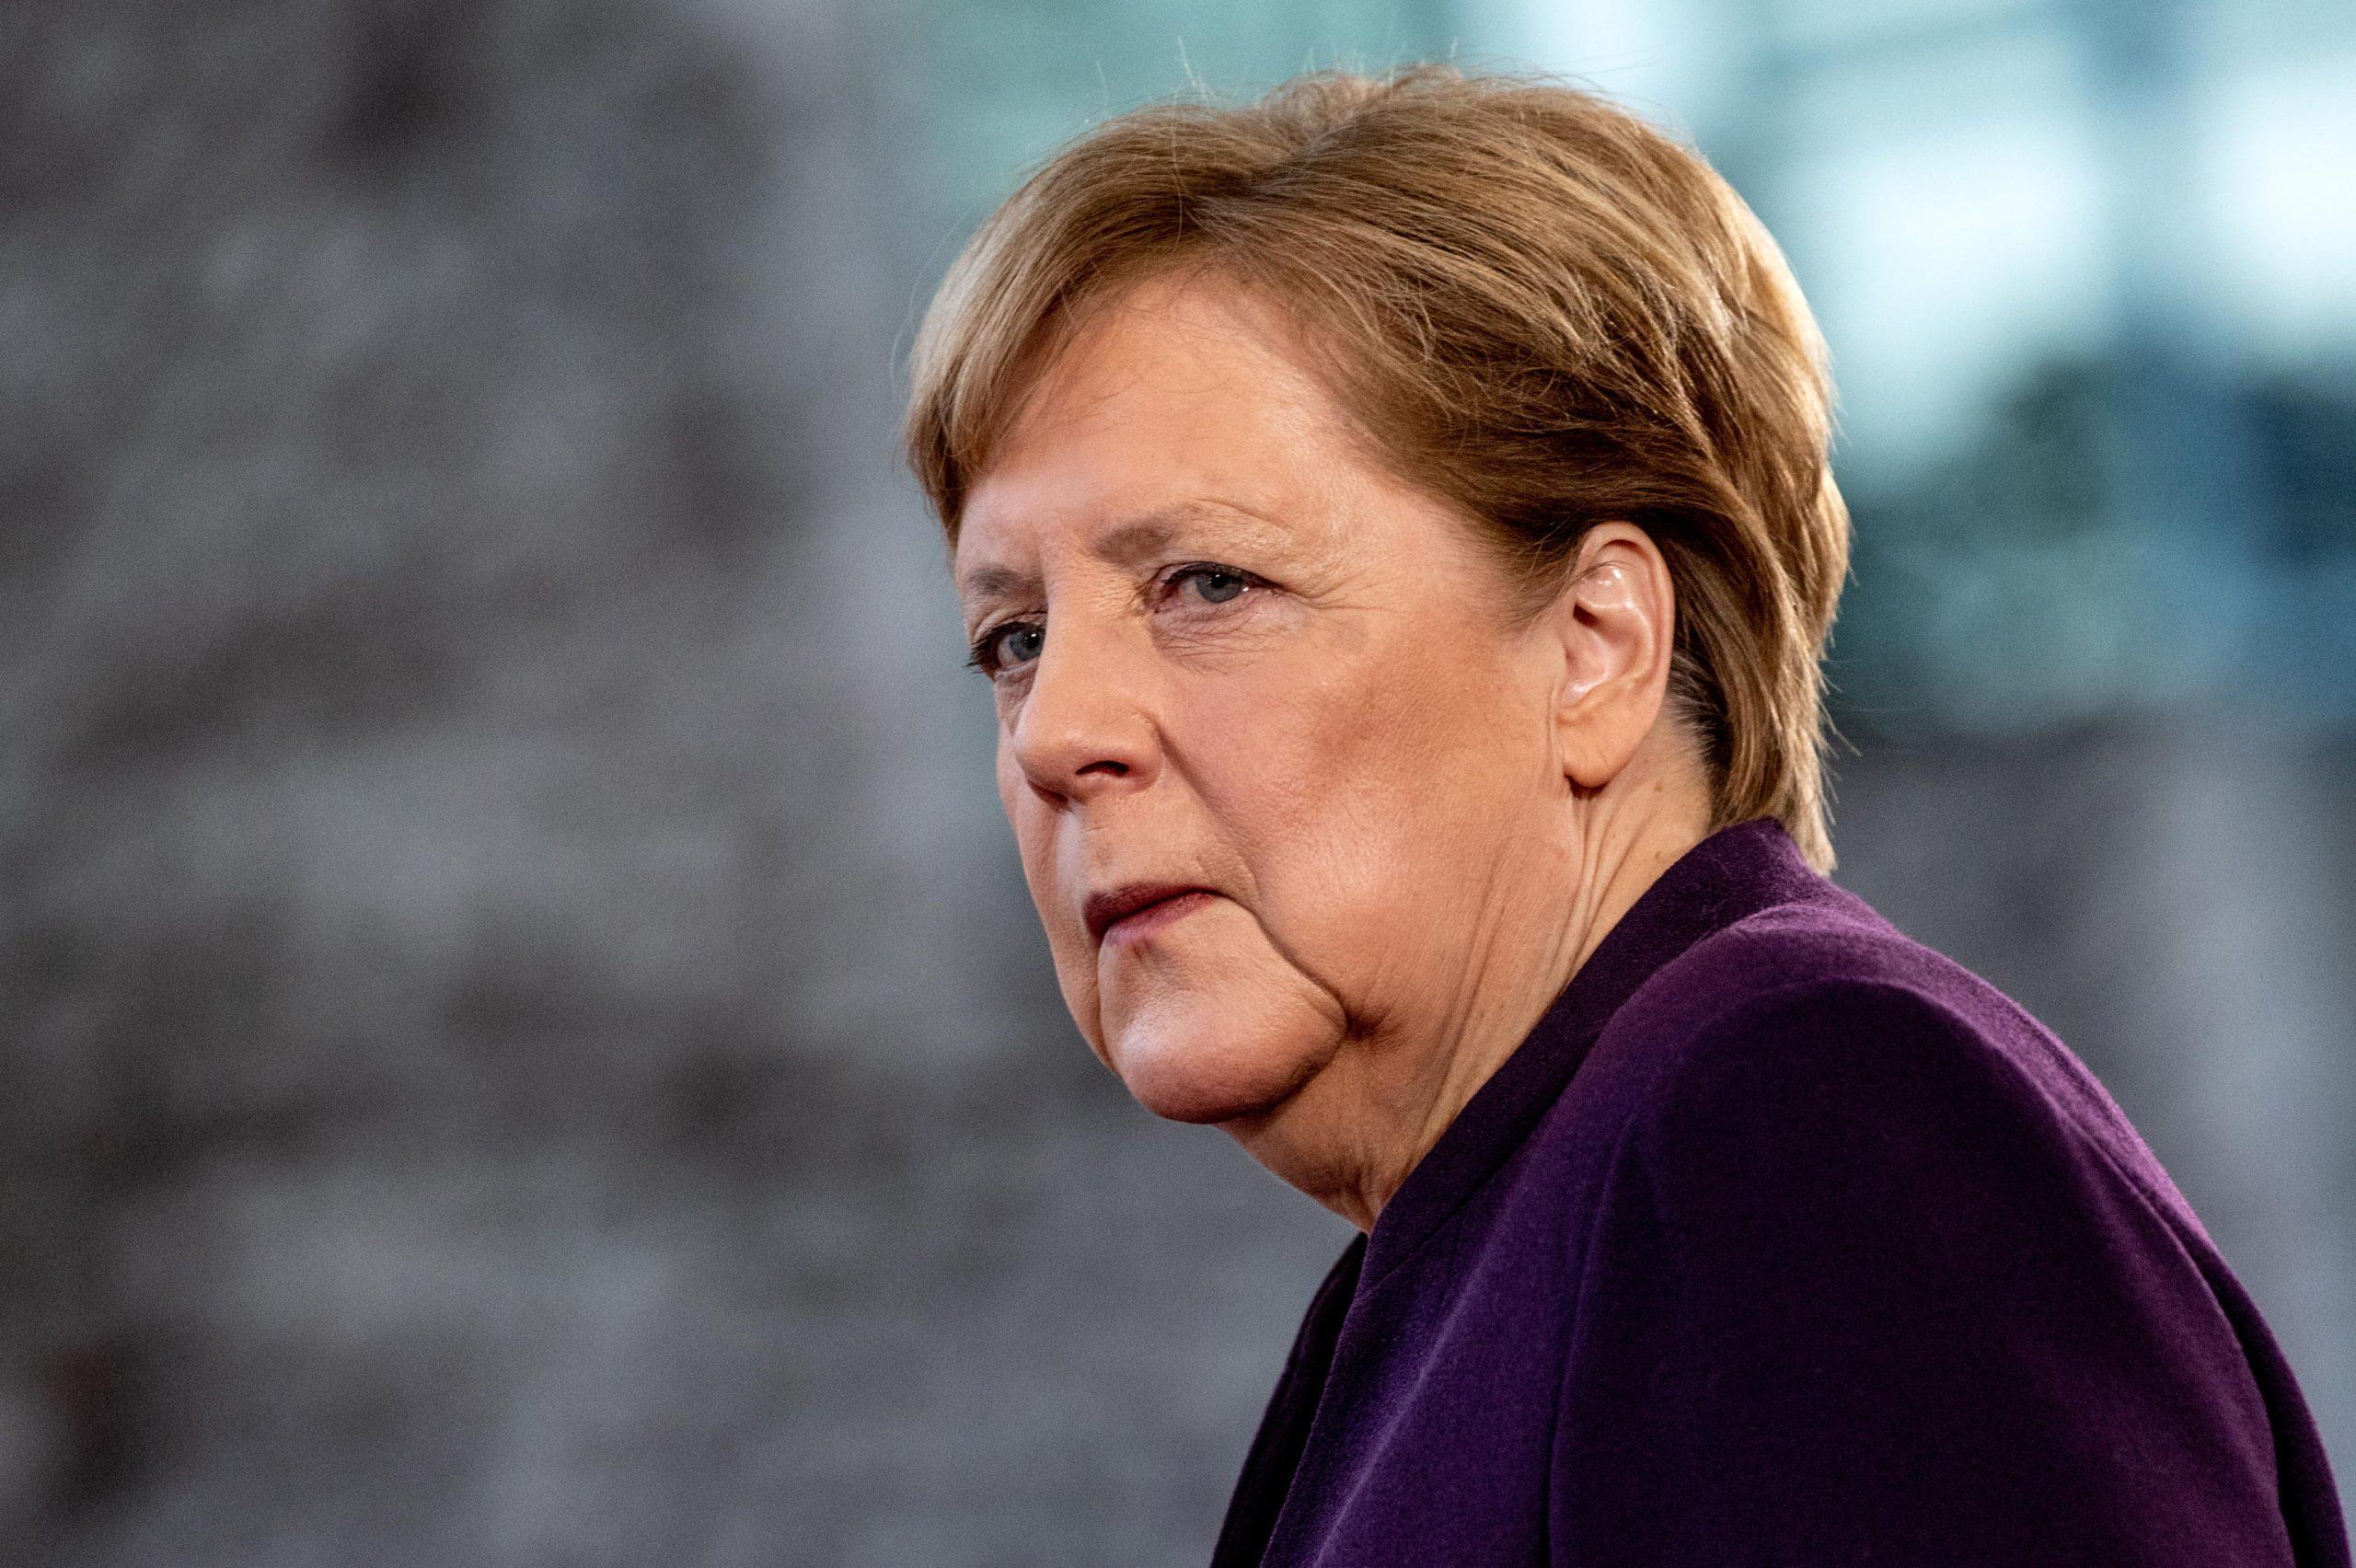 Merkel does not want "forced peace" between Ukraine and Russia